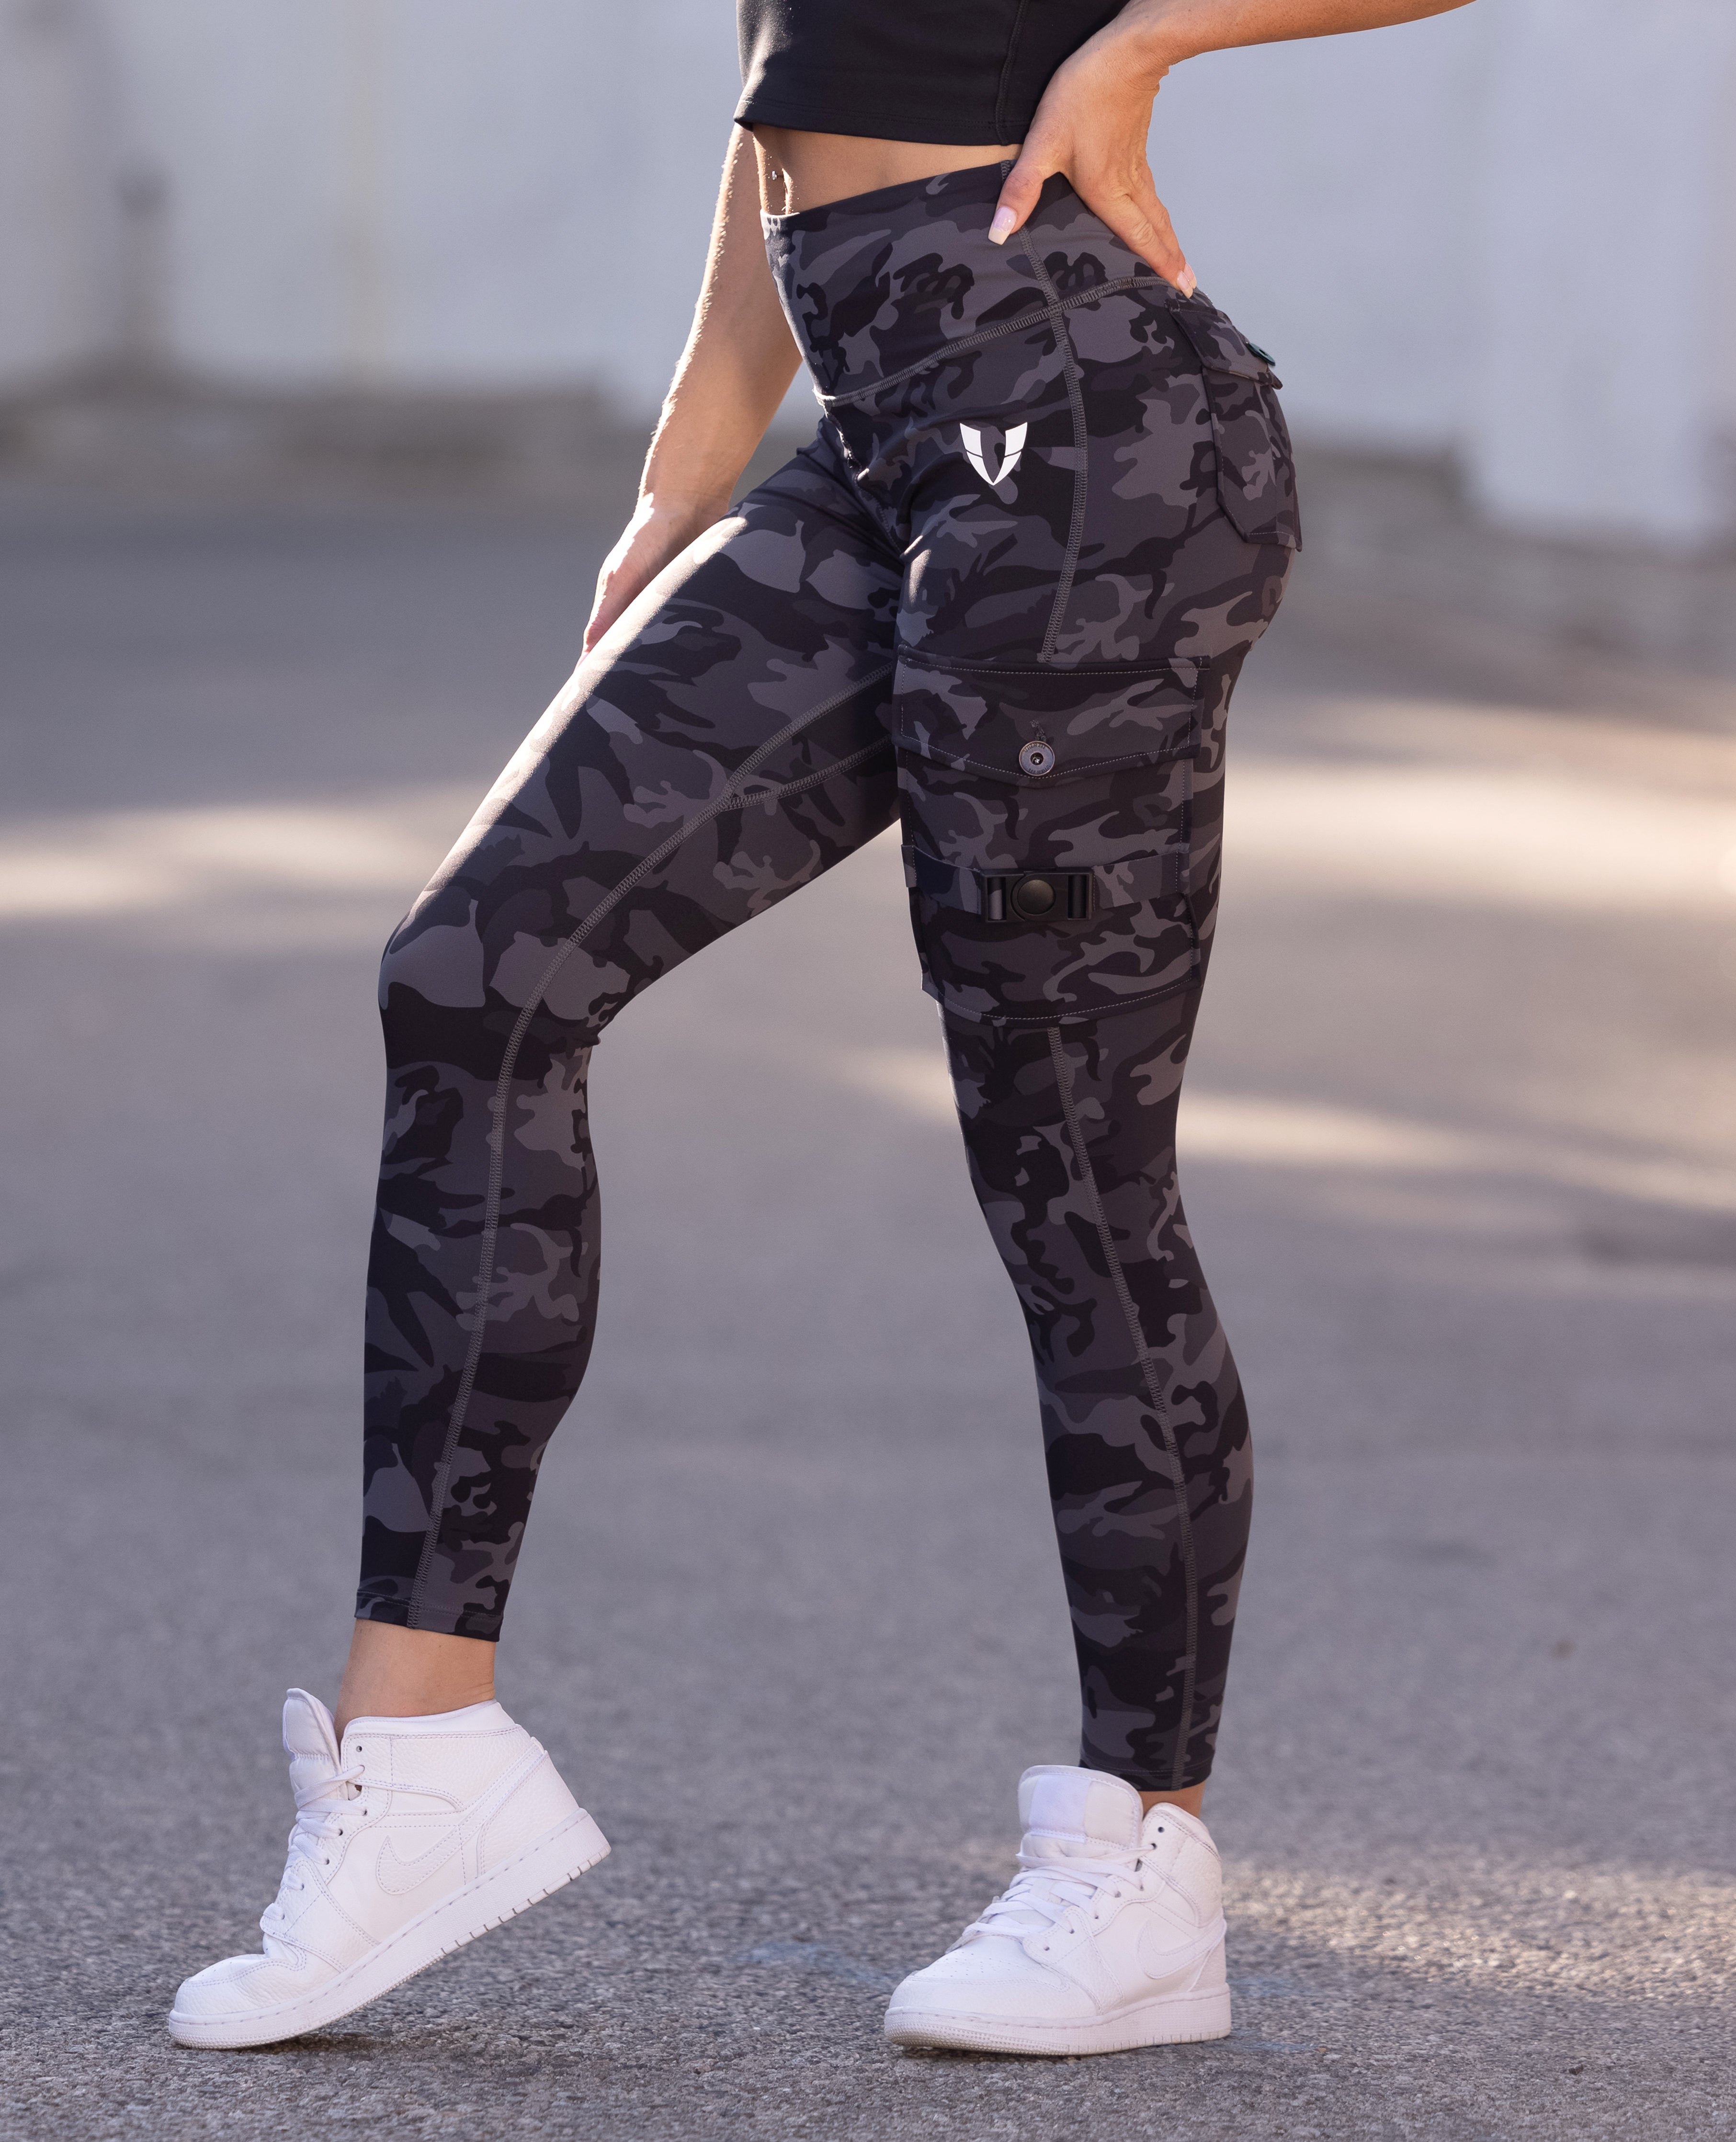 Cargo Fitness Leggings Camo FIRM ABS Reviews On, 46% OFF